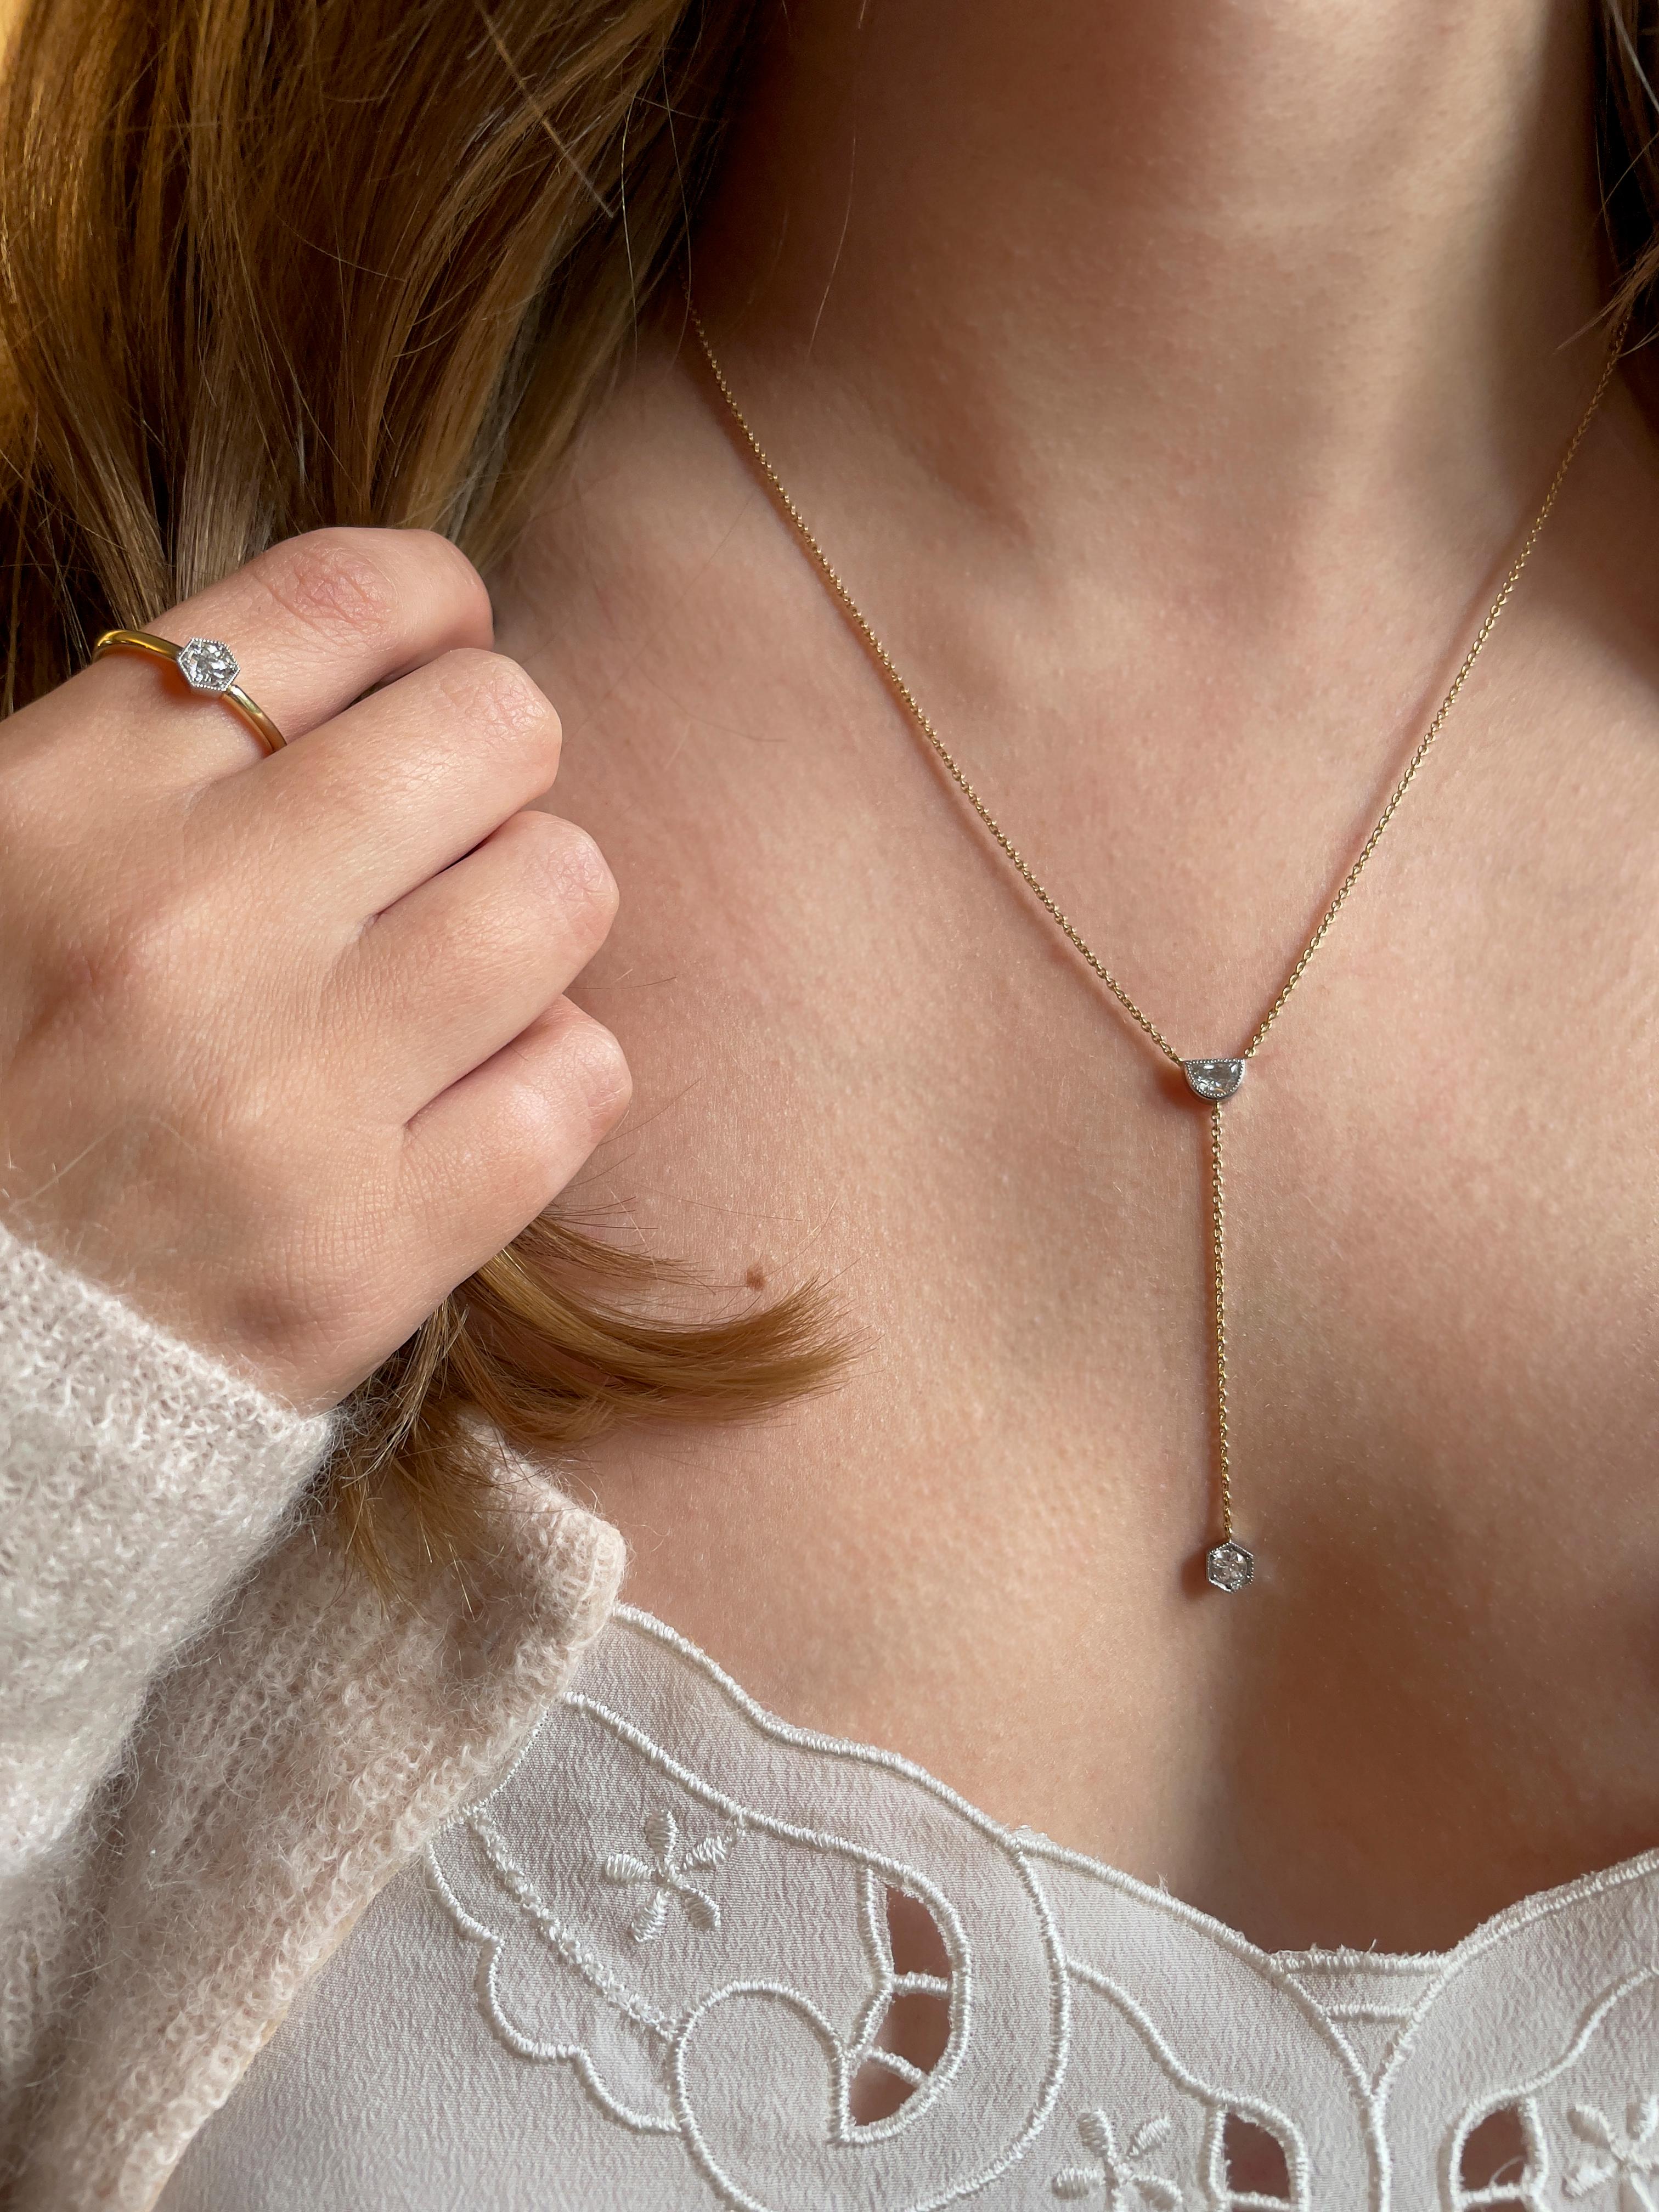 From the Clara collection, the Demi Lune Lariat pendant has been inspired by the geometry and clean lines of the Art Deco period with a modern twist. Both diamonds have been set in platinum with delicate and feminine millegrain detail. The antique